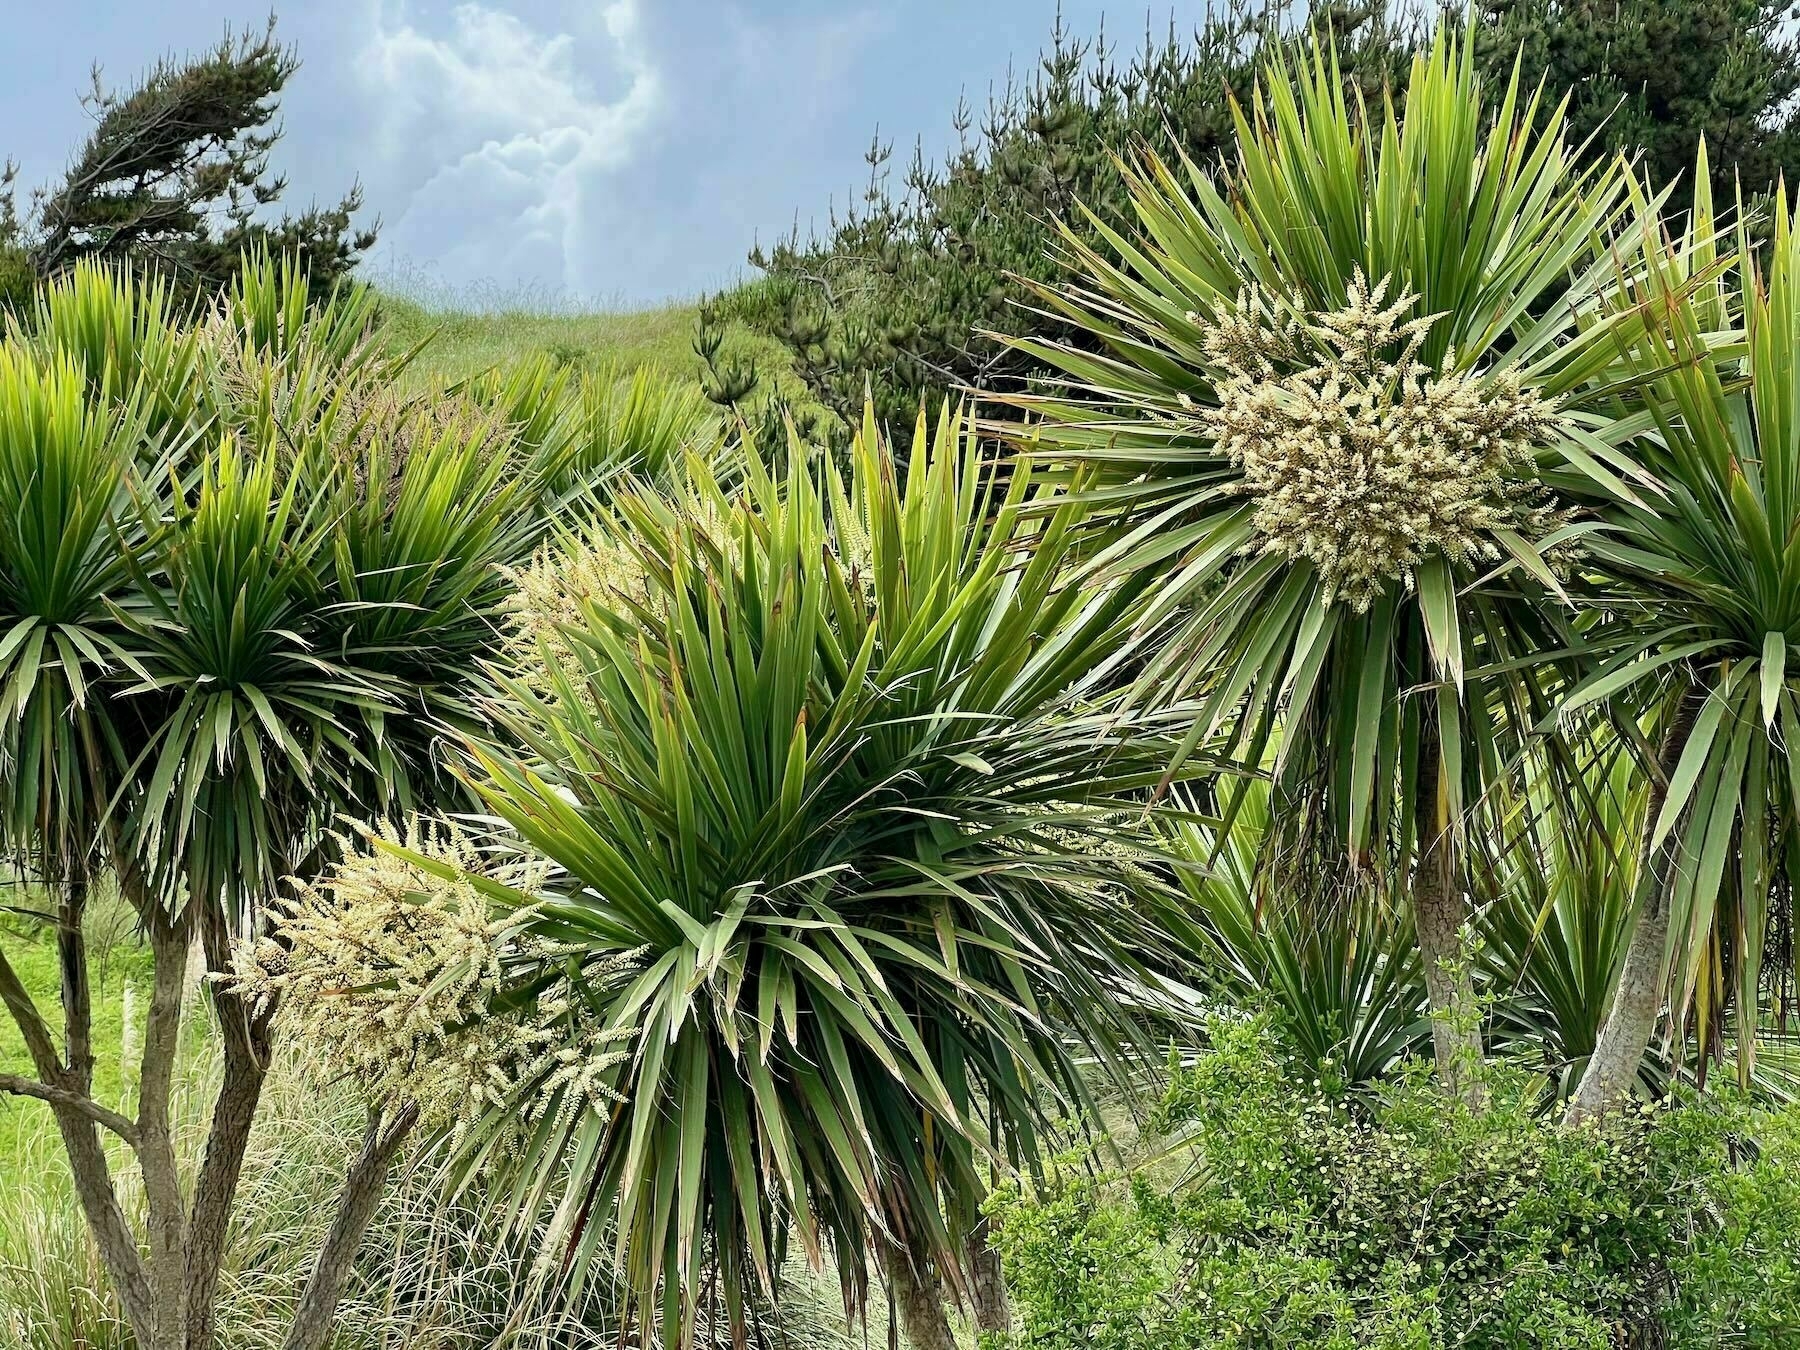 Cabbage trees with flowers in white panicles. 